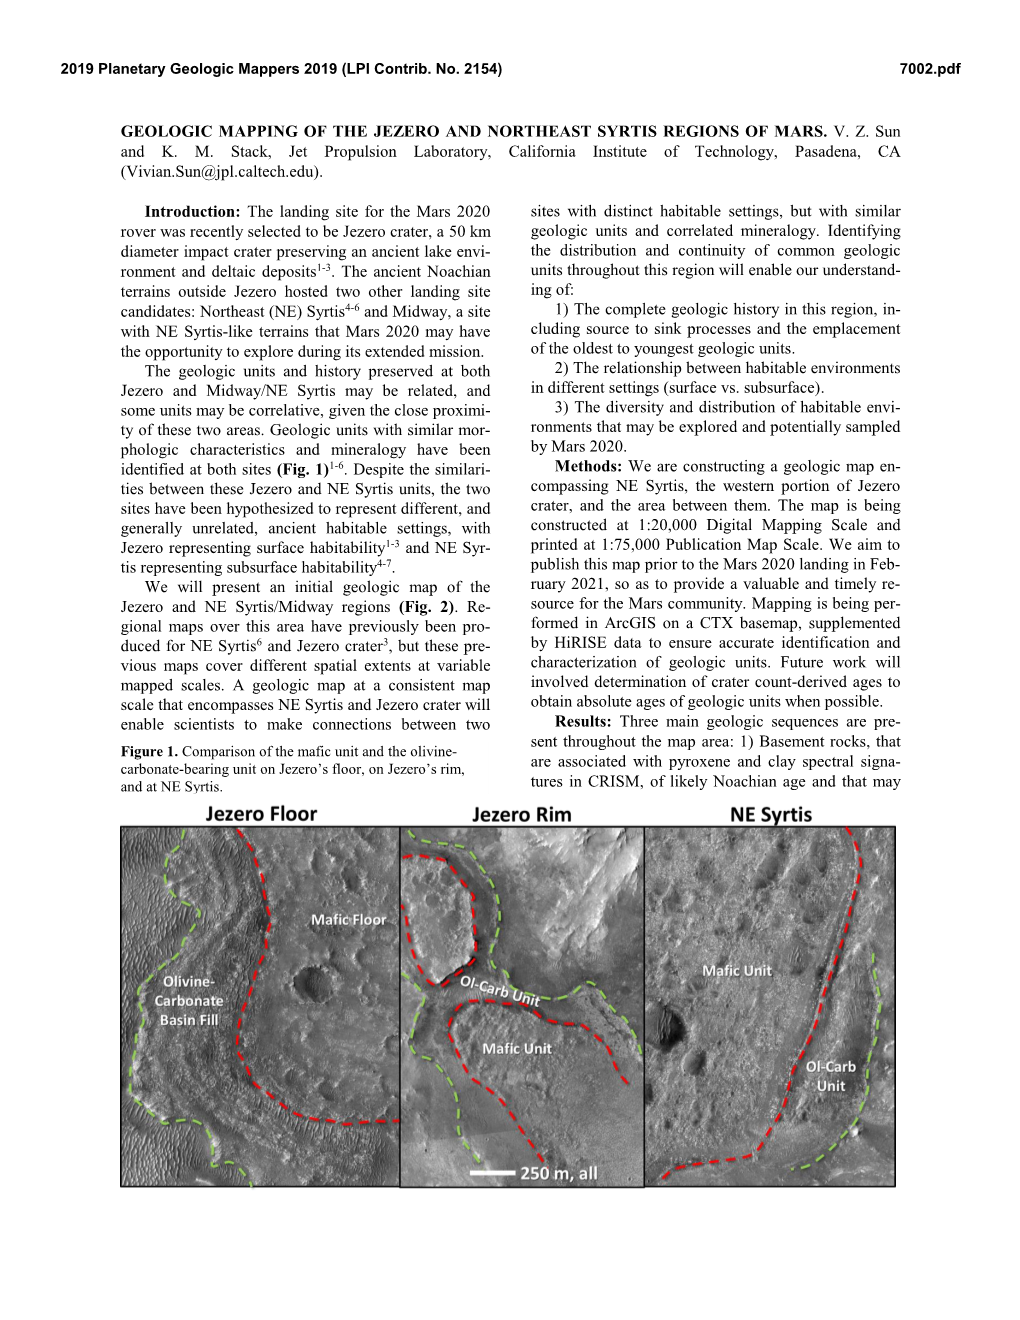 Geologic Mapping of the Jezero and Northeast Syrtis Regions of Mars